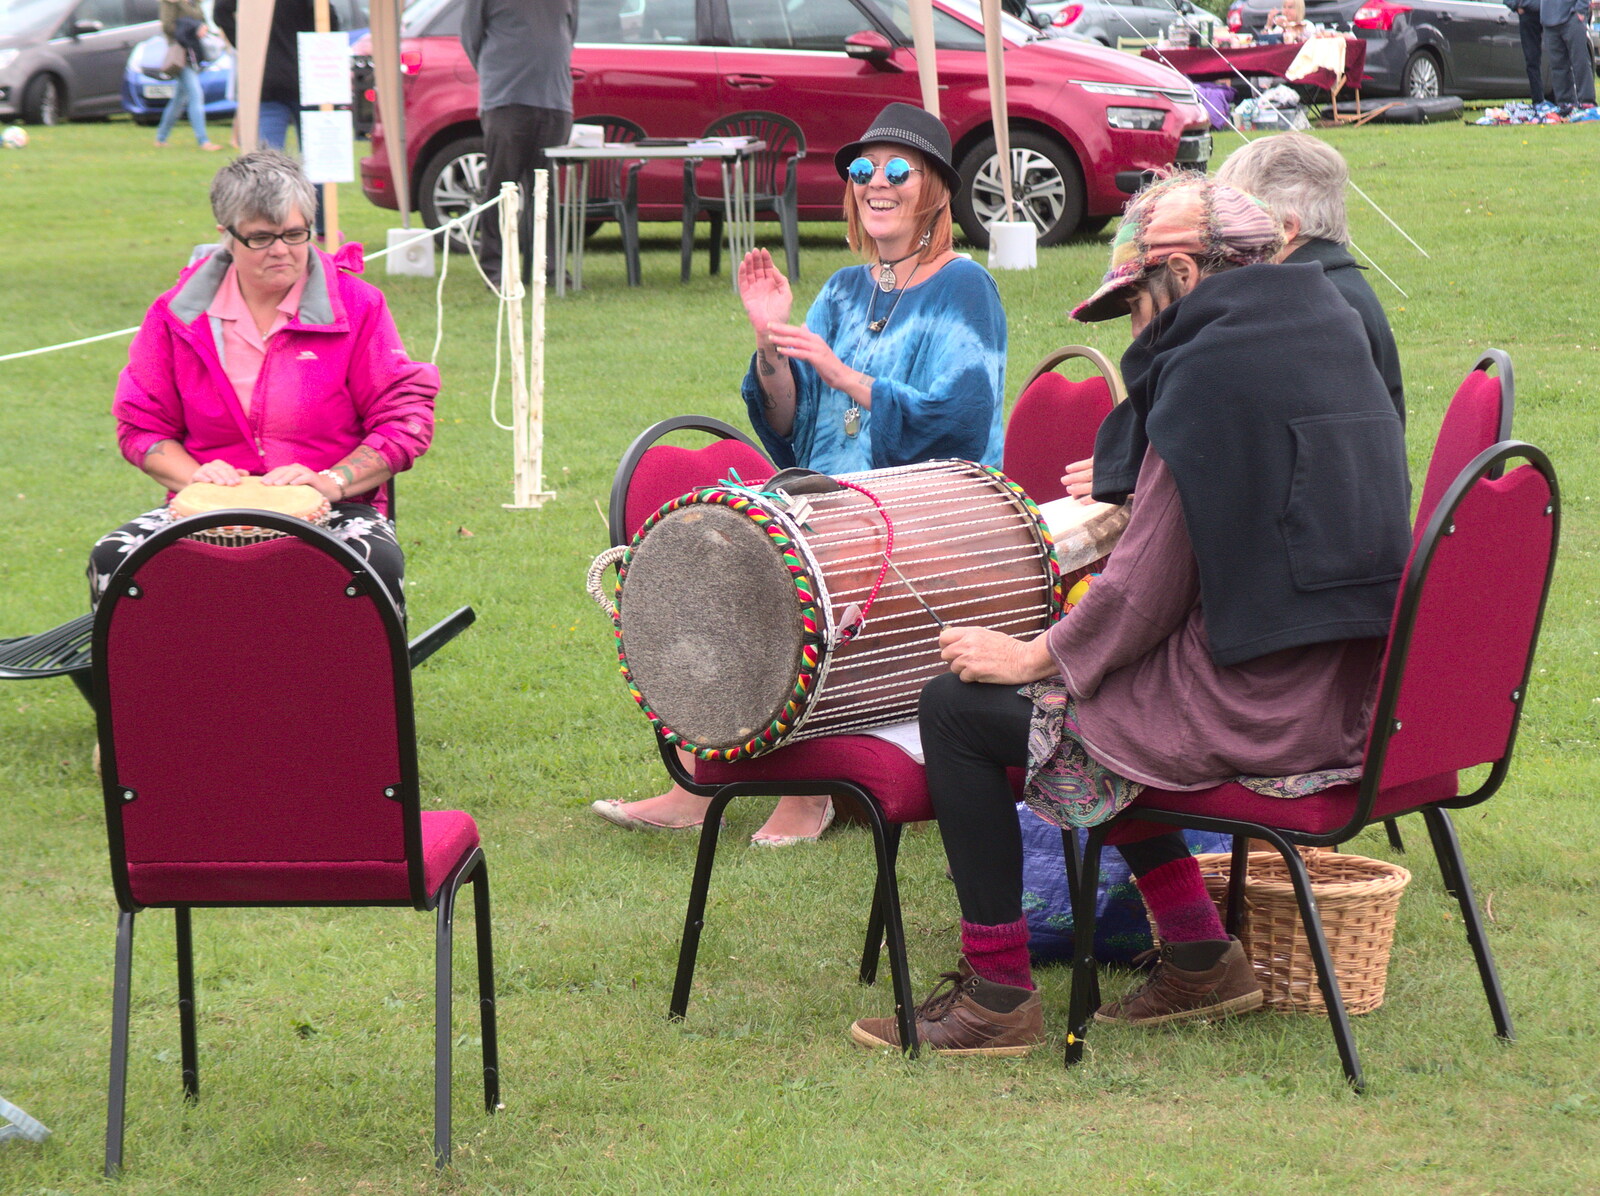 More African-style drumming from A Summer Fete, Palgrave, Suffolk - 10th September 2017